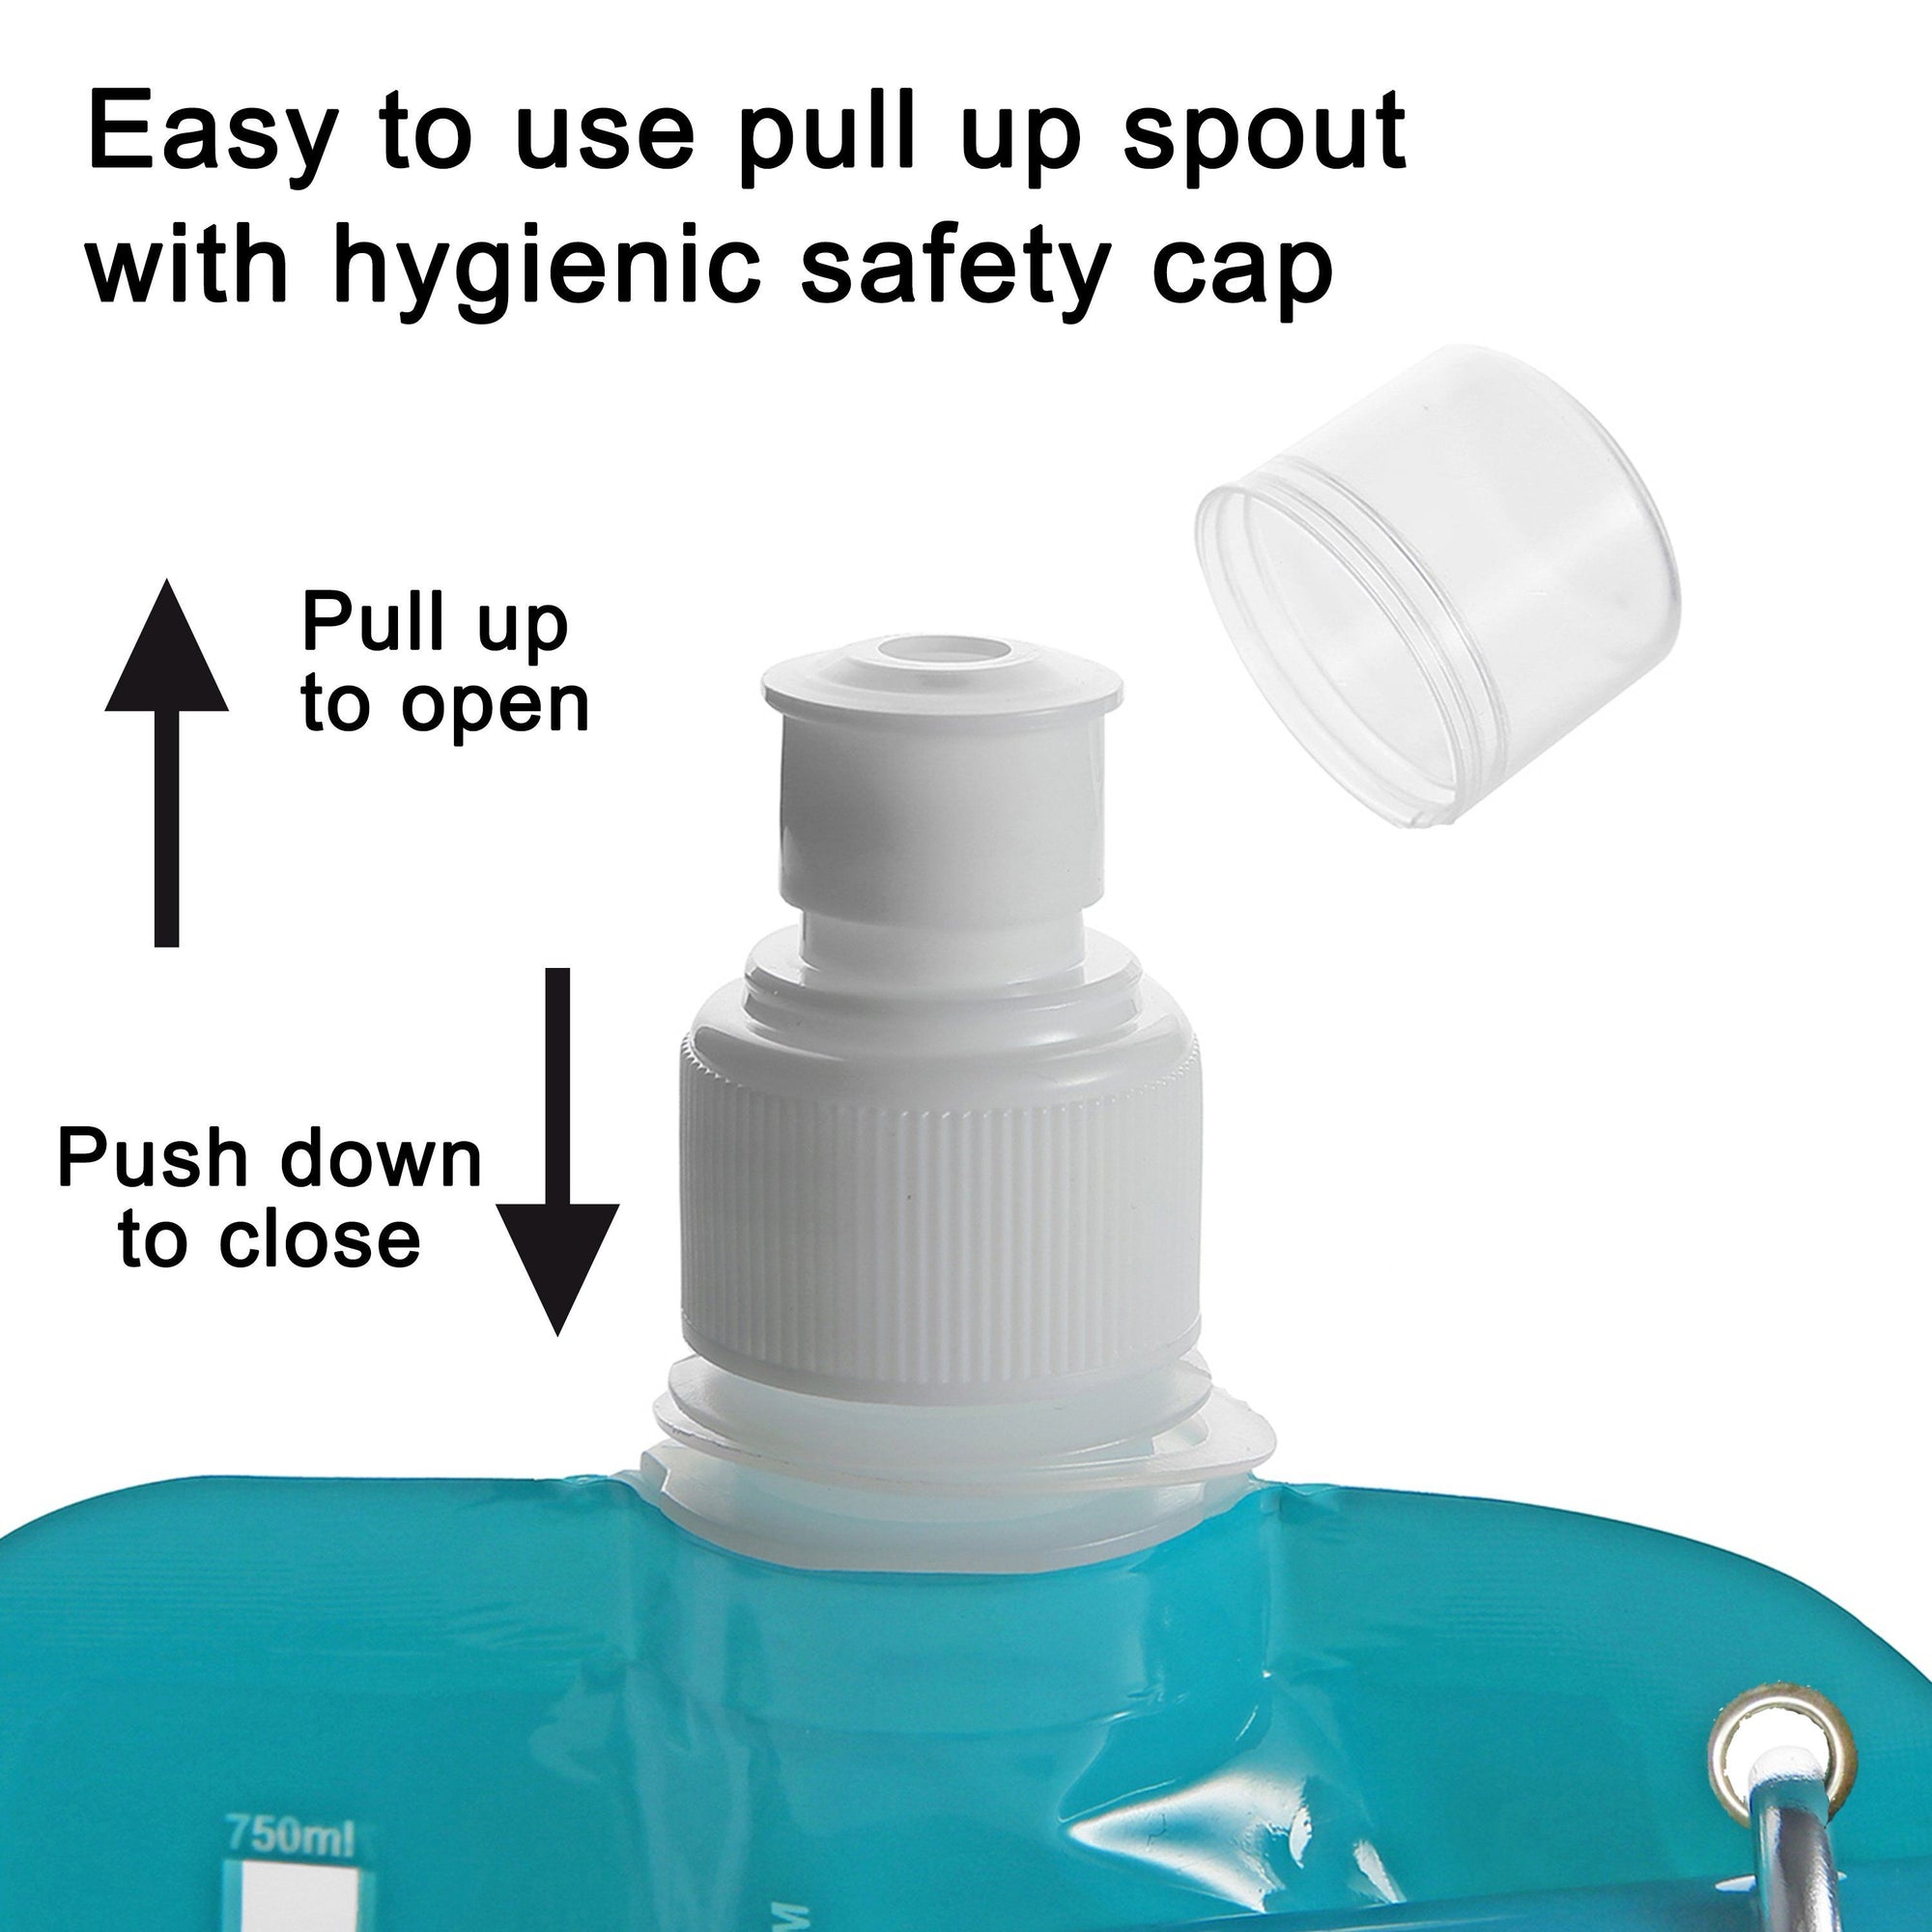 HydraMate Foldable Bottle. Collapsible 750ml